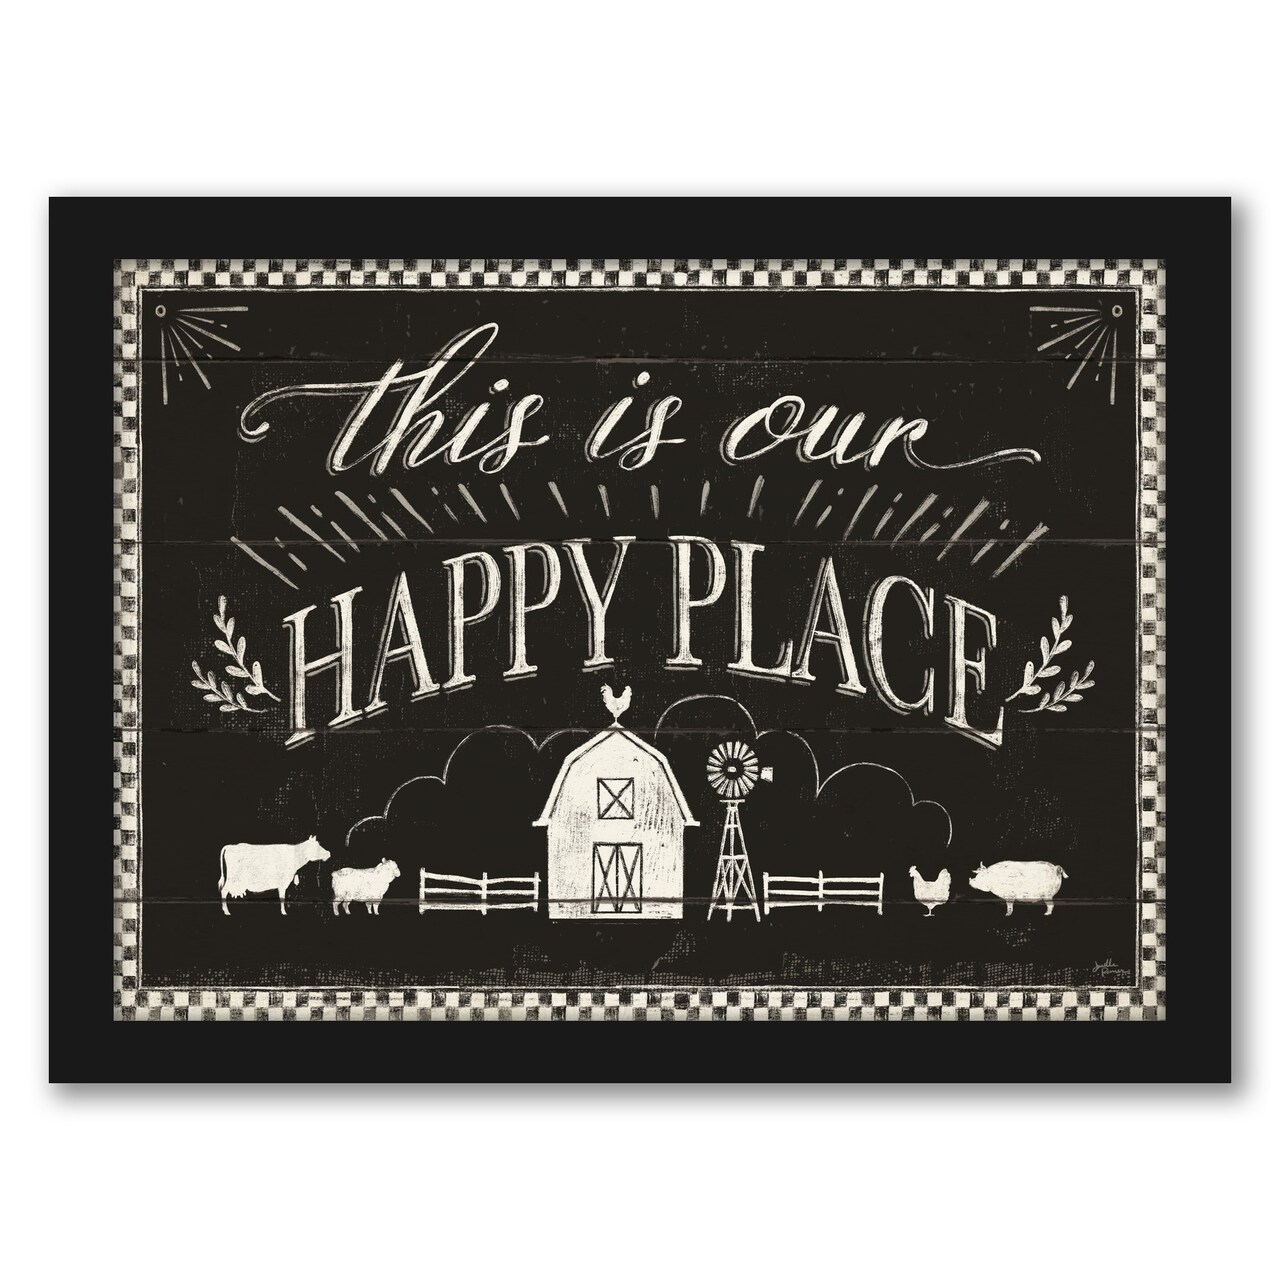 Country Thoughts I Black by Janelle Penner Black Framed Print 8x10 - Americanflat